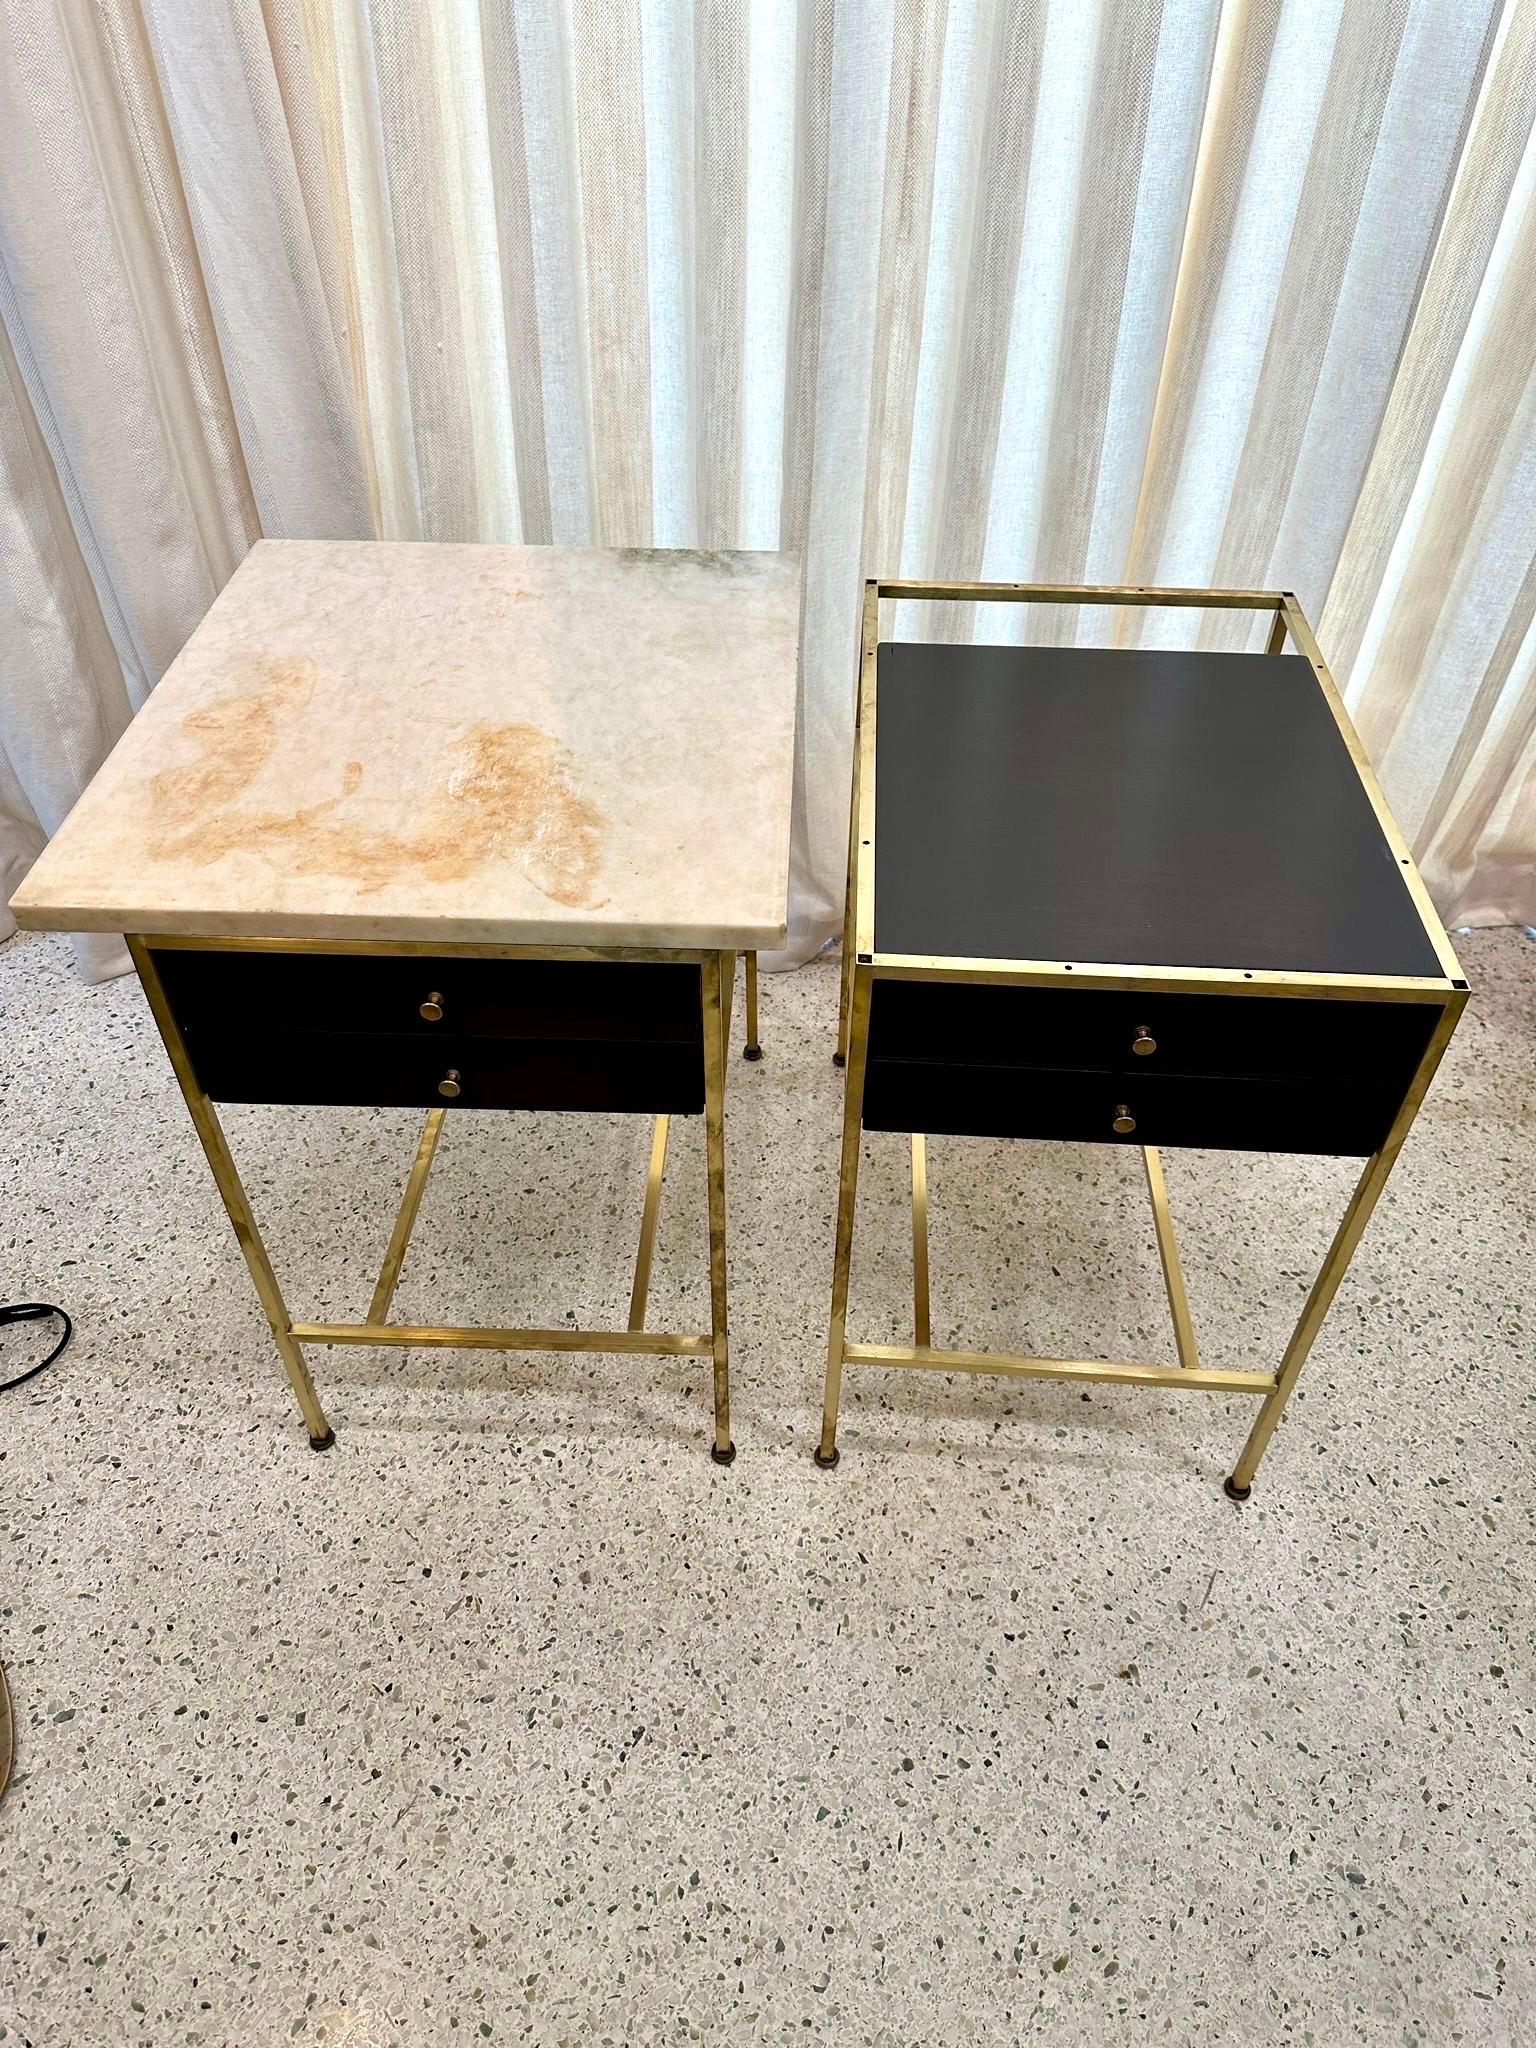 Mid-20th Century Paul McCobb Side Tables #8712 with Original Marble Tops, PAIR For Sale